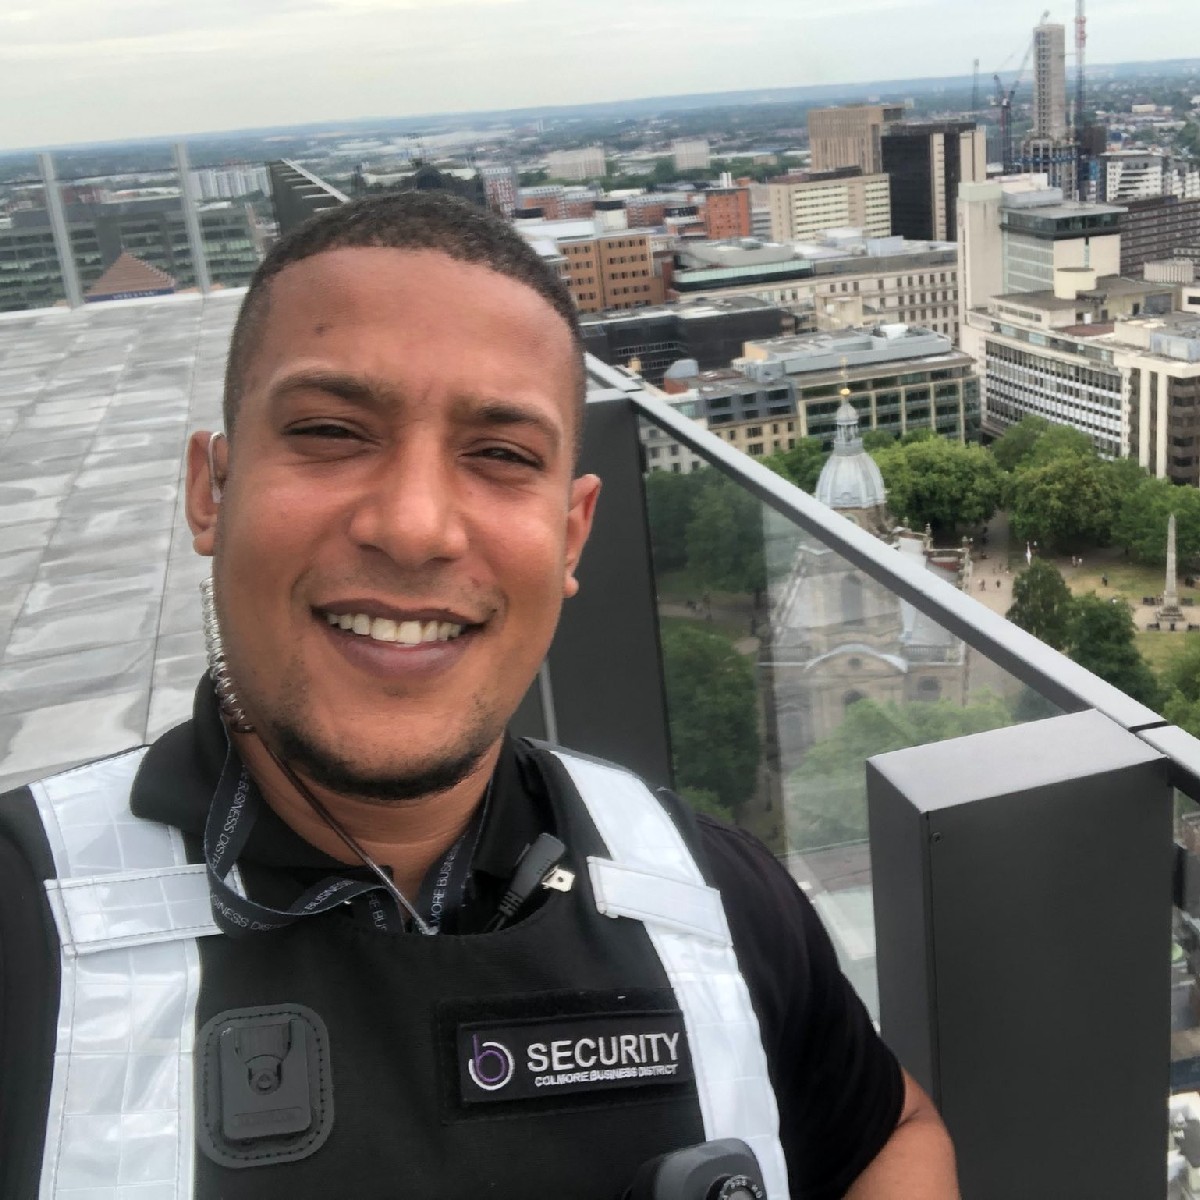 Morning everyone! 👋 I’m John-Jo, the Street Operations Manager at Colmore BID. I supervise a dynamic team of 4 security officers that work to keep the BID safe and sound. For #WorldHomelessnessDay I’ll be taking over Twitter to tell you all about the work we do.